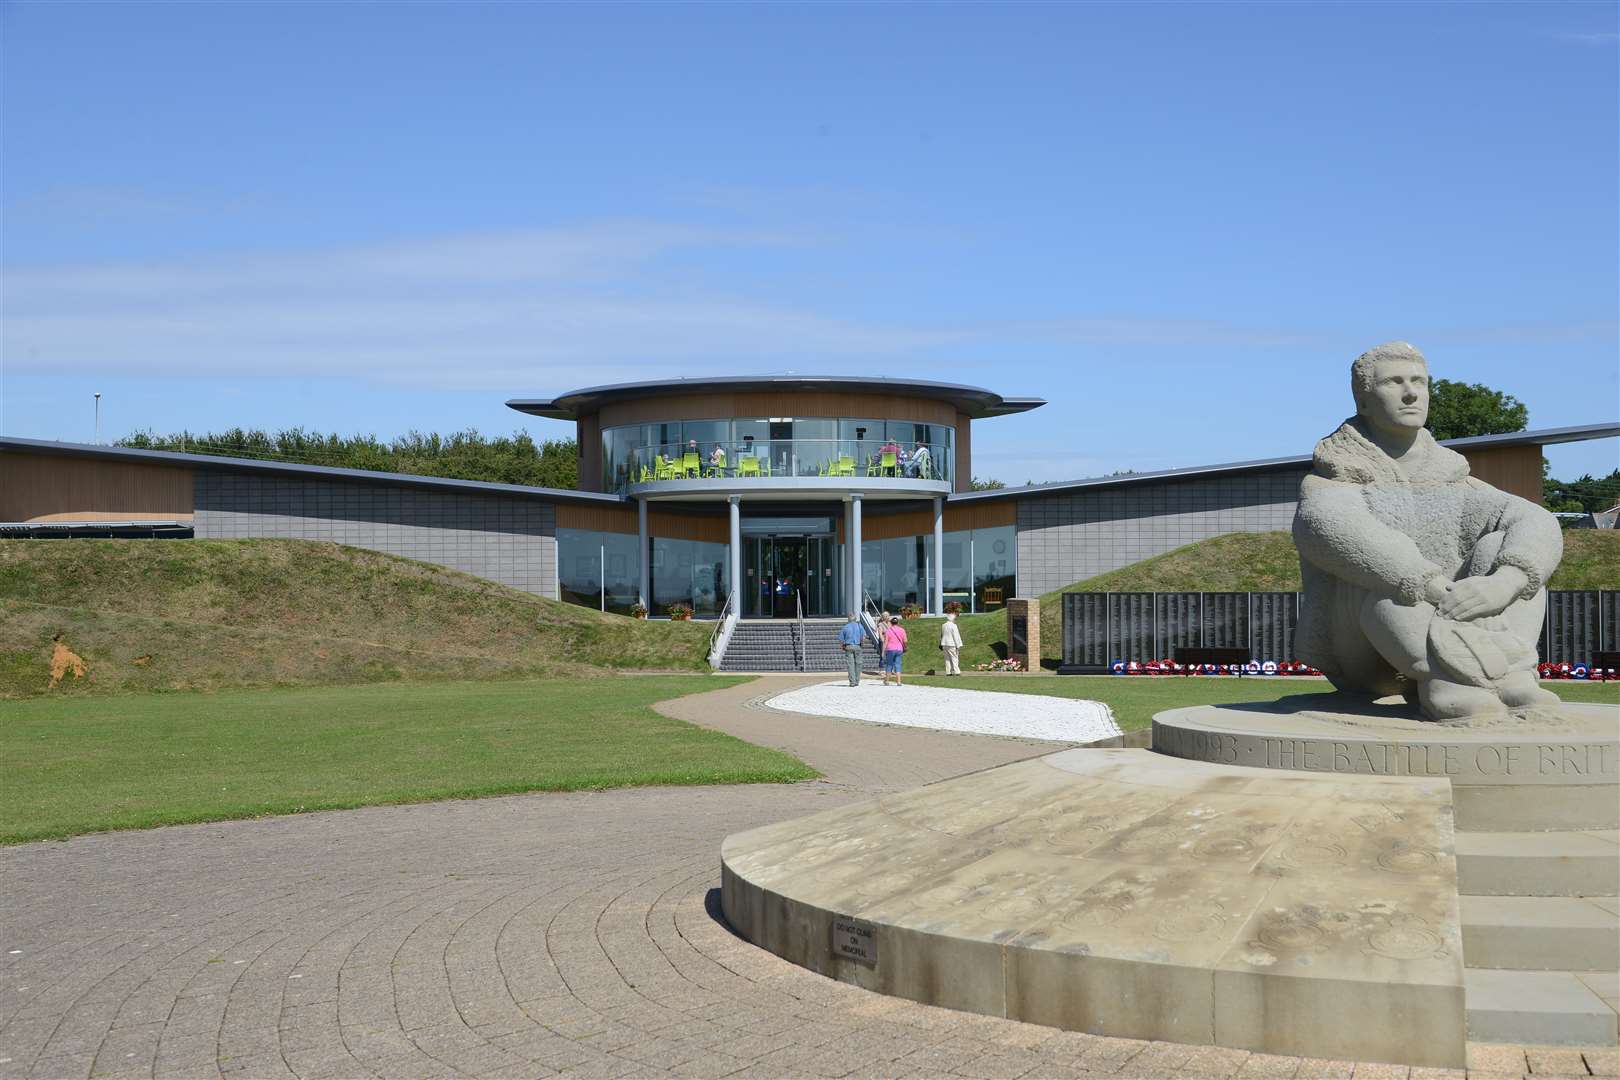 The Battle of Britain Memorial, with the Wing building, at Capel-le-Ferne